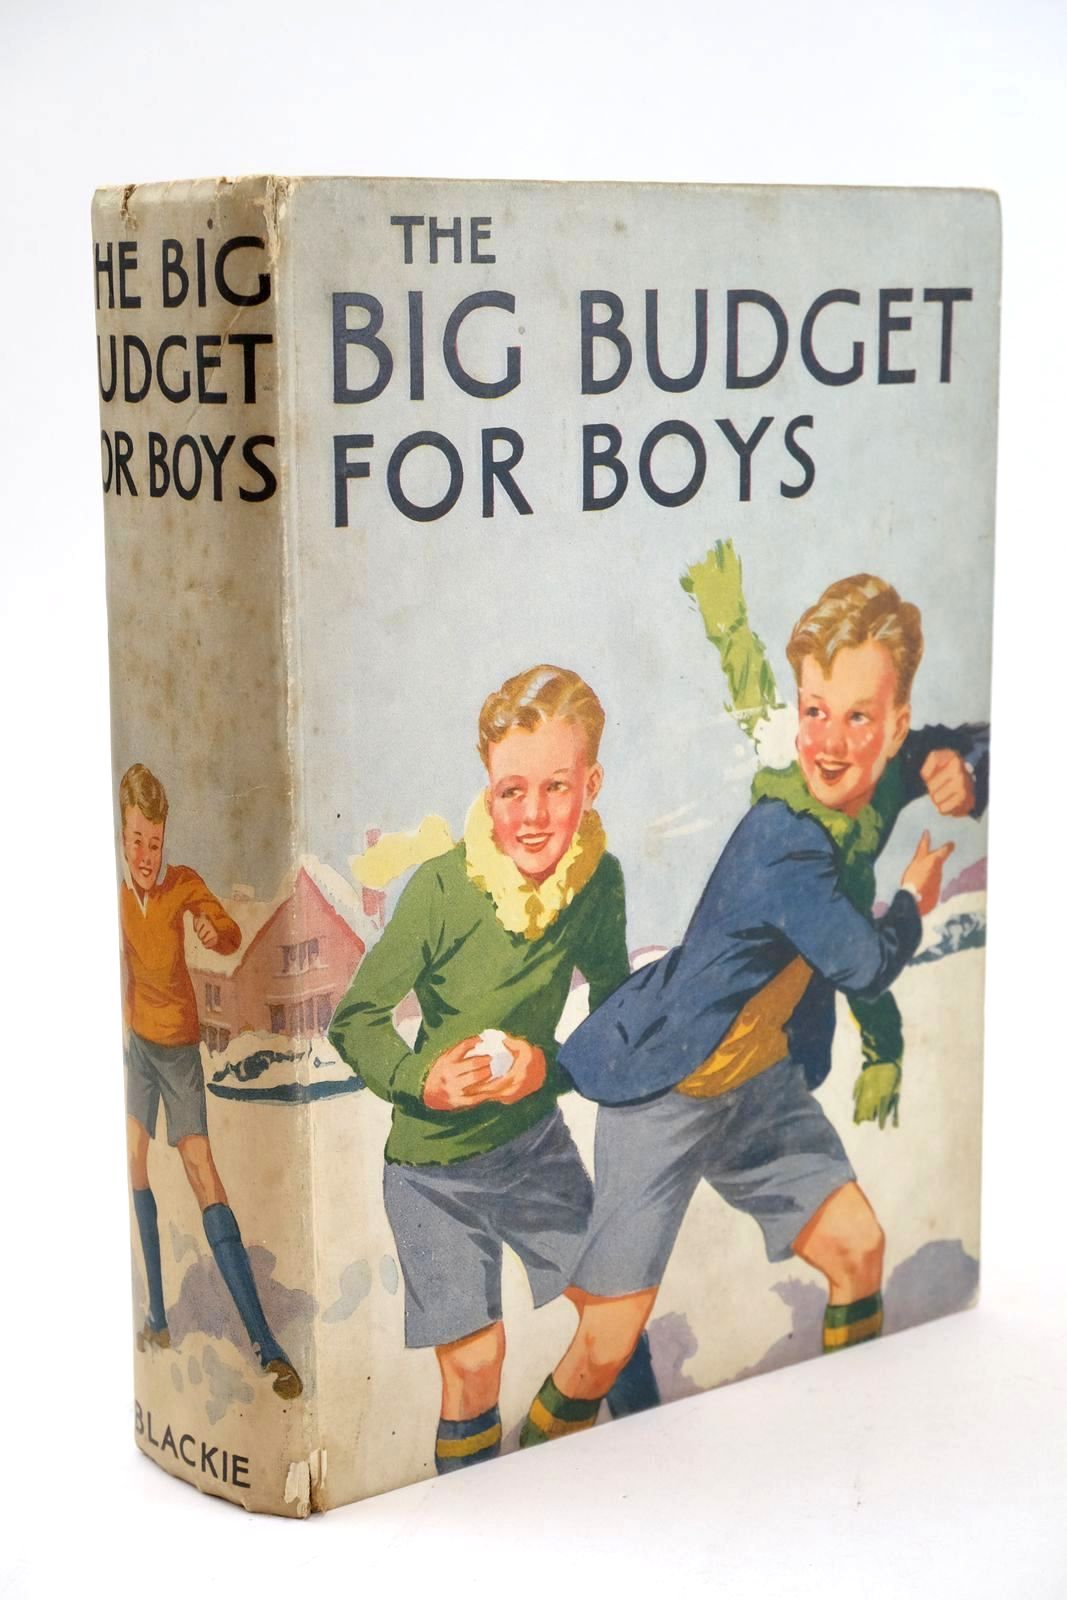 Photo of THE BIG BUDGET FOR BOYS written by Westerman, Percy F. Havilton, Jeffrey Lucas, S. Beresford et al, illustrated by Mays, D.L. Lumley, Savile Silas, Ellis et al., published by Blackie &amp; Son Ltd. (STOCK CODE: 1325131)  for sale by Stella & Rose's Books